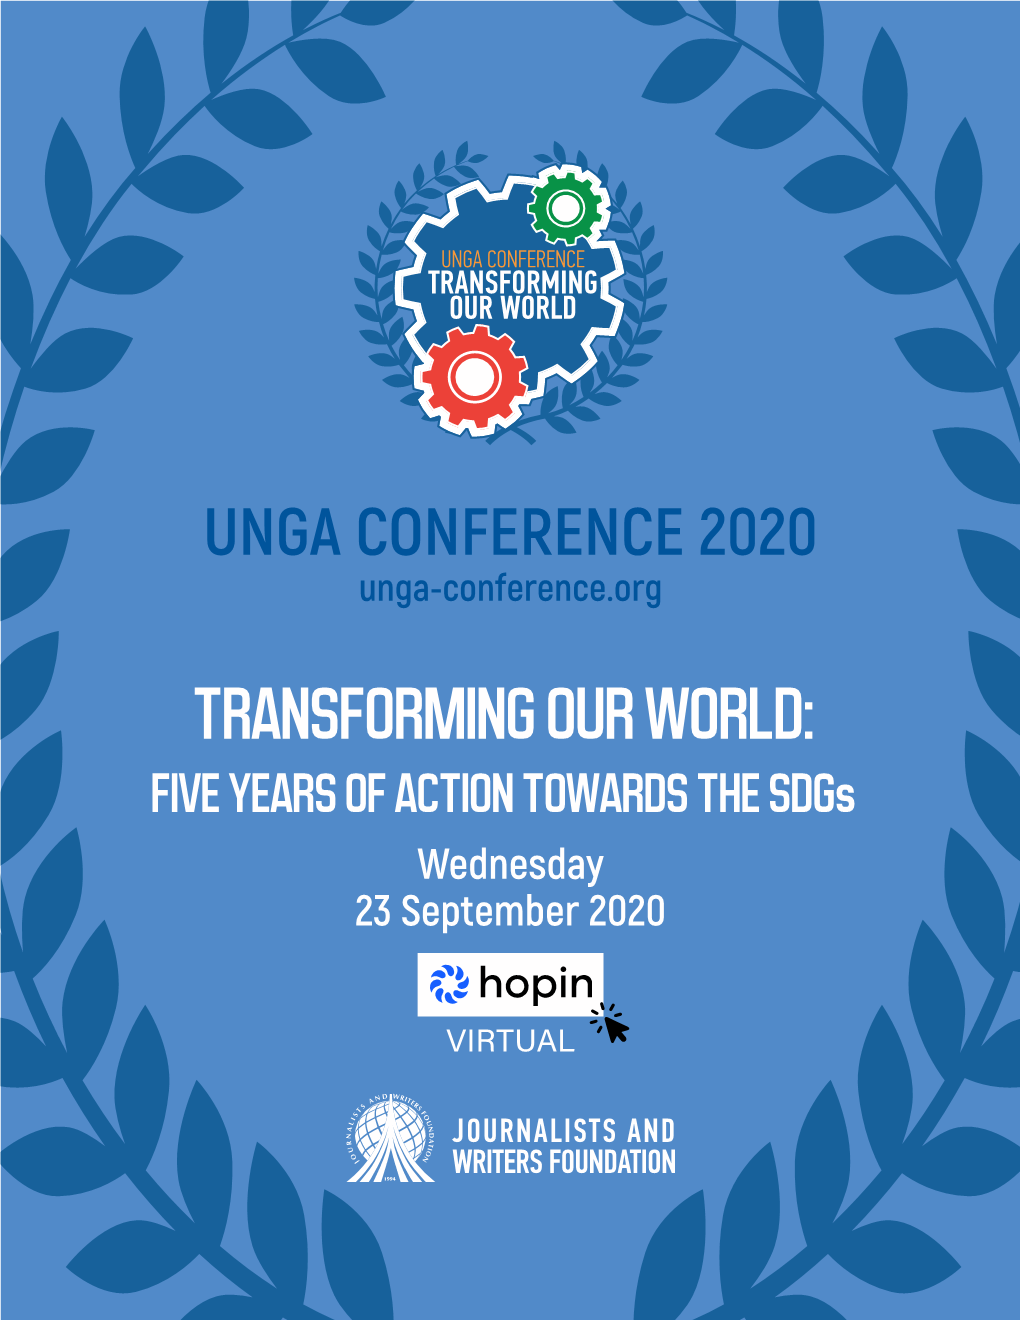 TRANSFORMING OUR WORLD: FIVE YEARS of ACTION TOWARDS the Sdgs Wednesday 23 September 2020